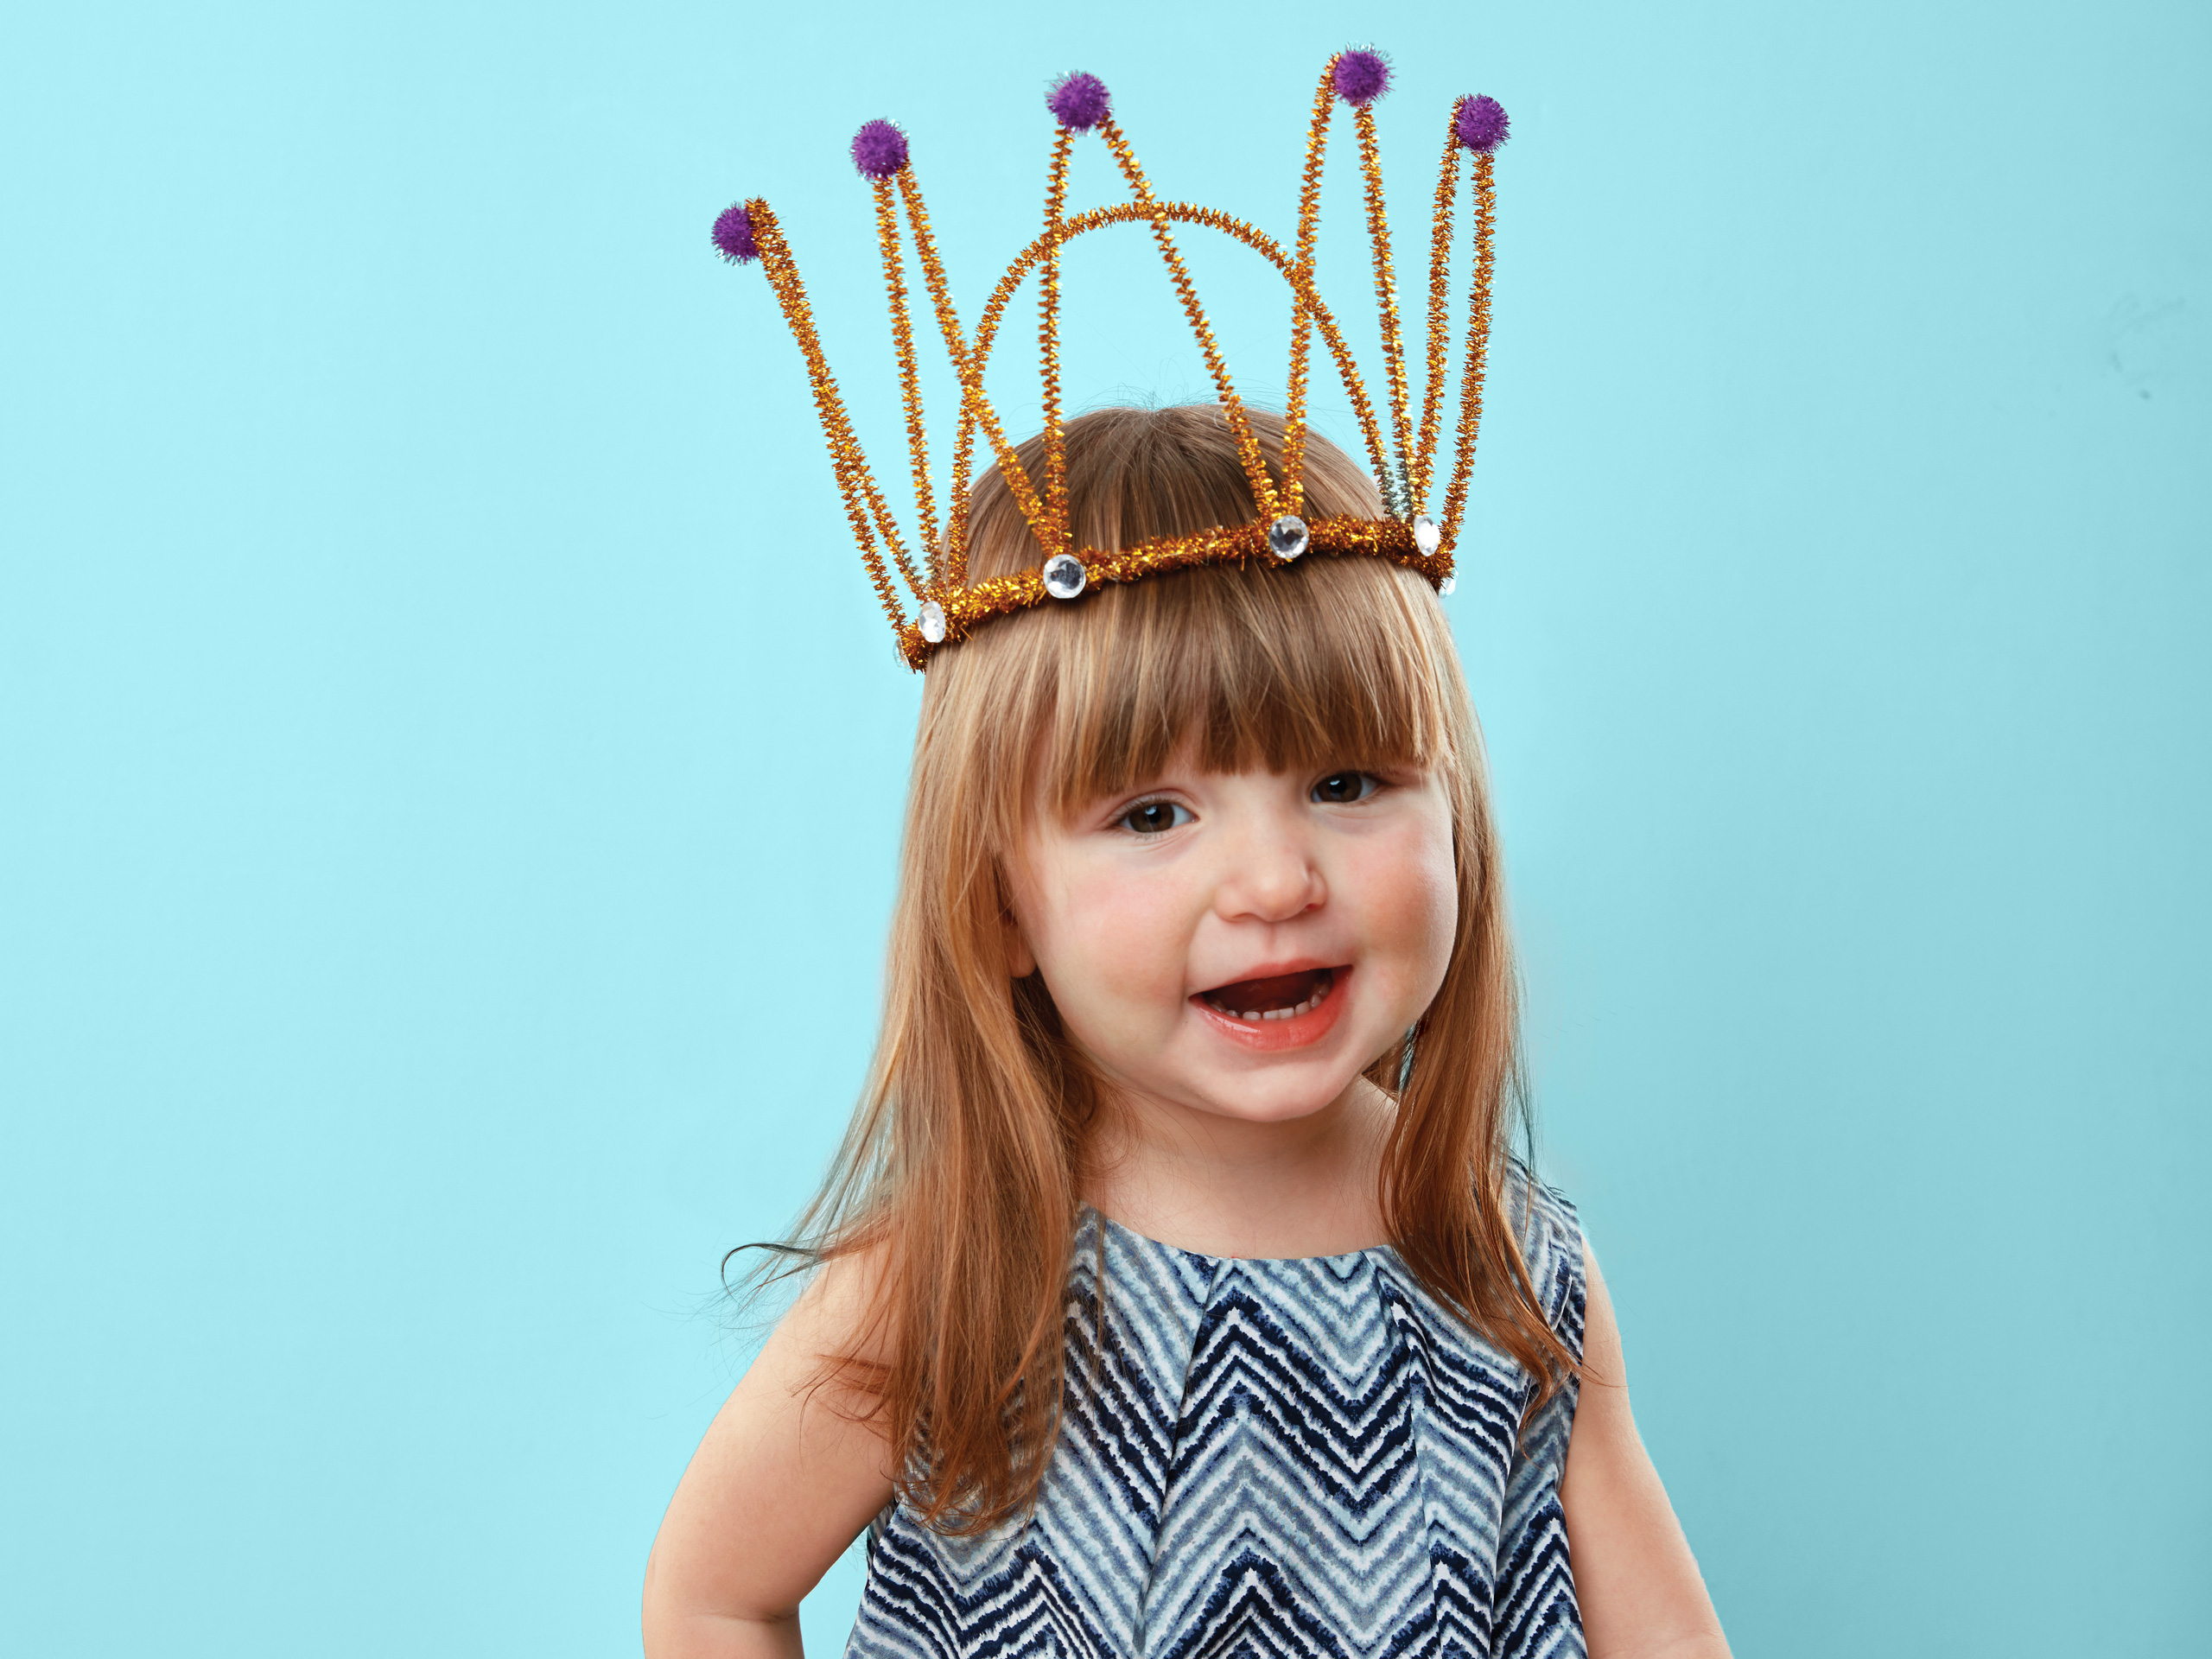 Pipe cleaner crowns